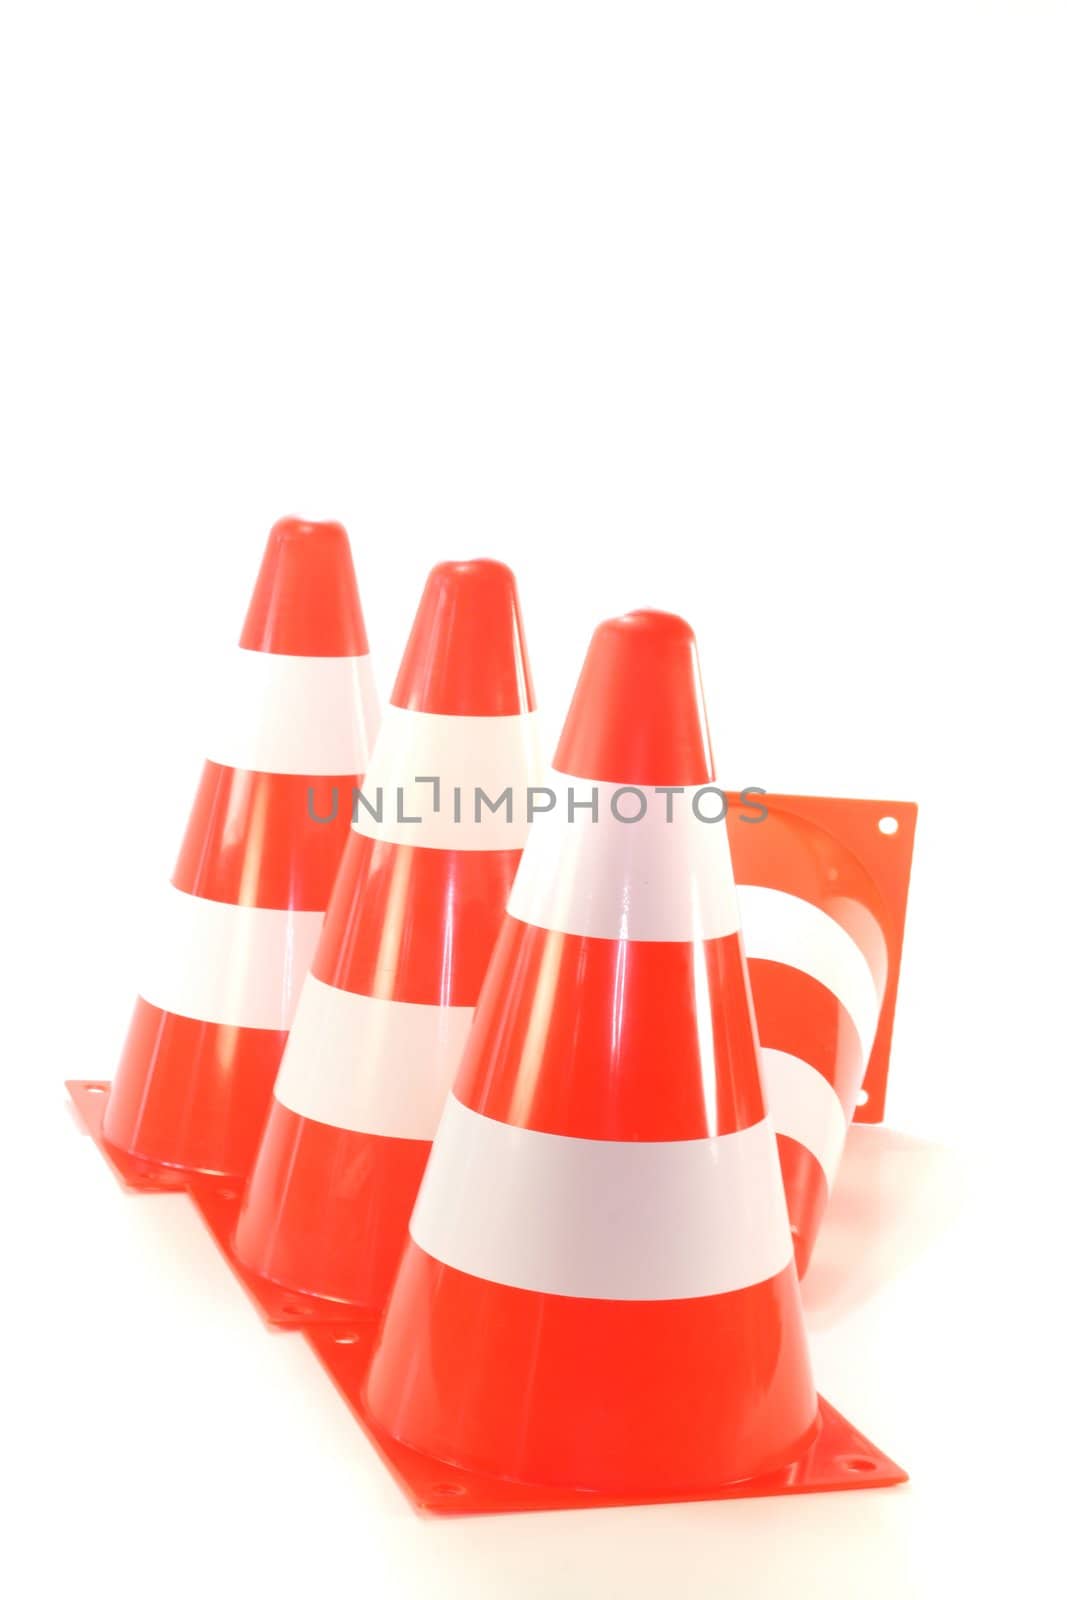 red and white pylons on a white background